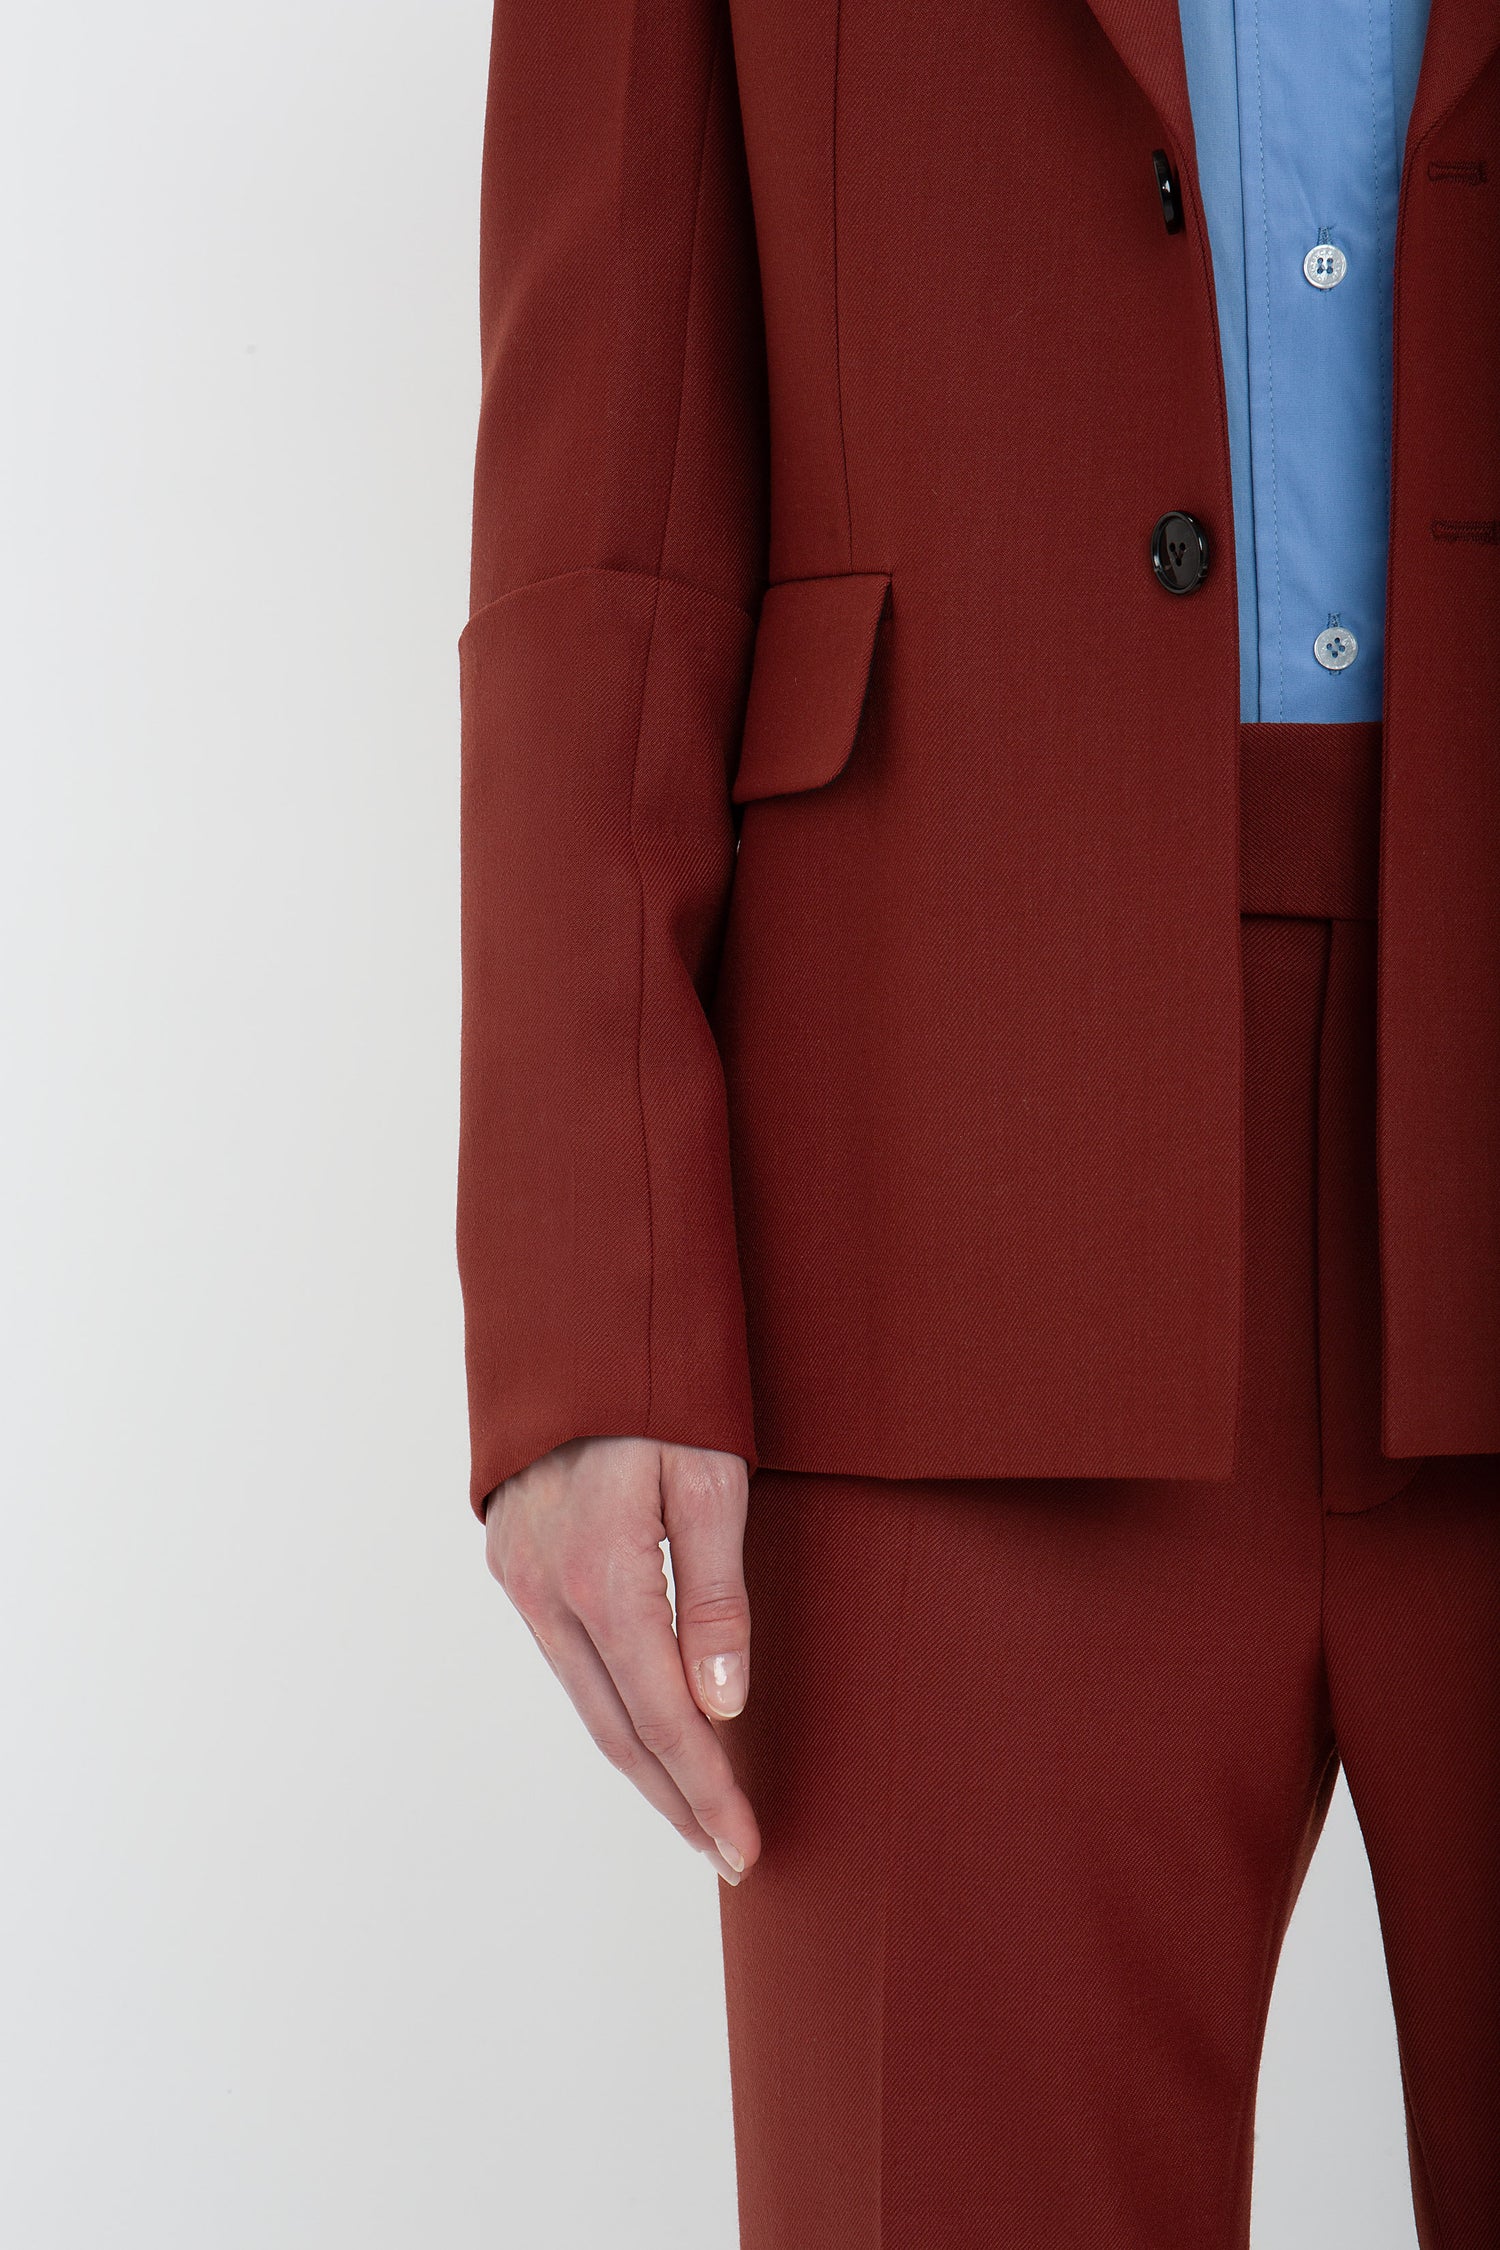 Close-up of a person wearing a red Sleeve Detail Patch Pocket Jacket In Russet by Victoria Beckham and pants with a light blue shirt. Their left hand is visible by their side, showcasing the contemporary detailing. The background is plain white.